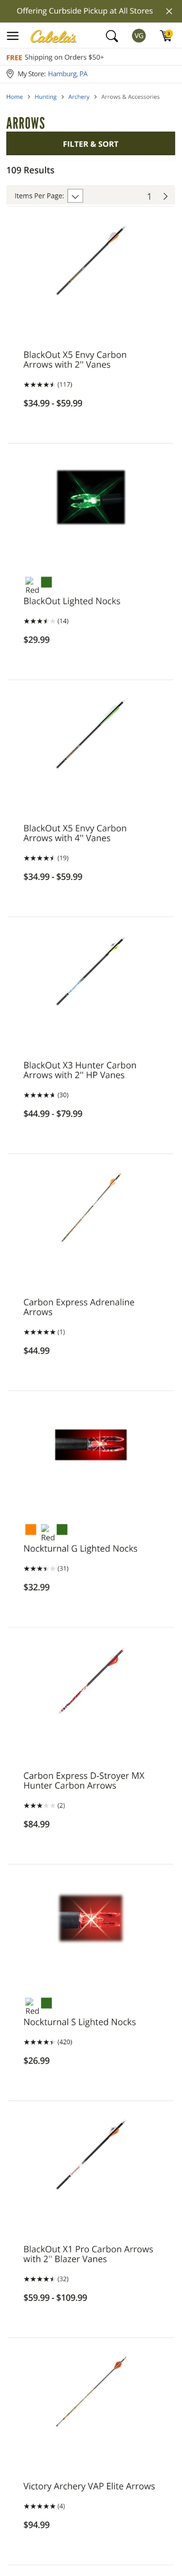 cabelas category page mobile